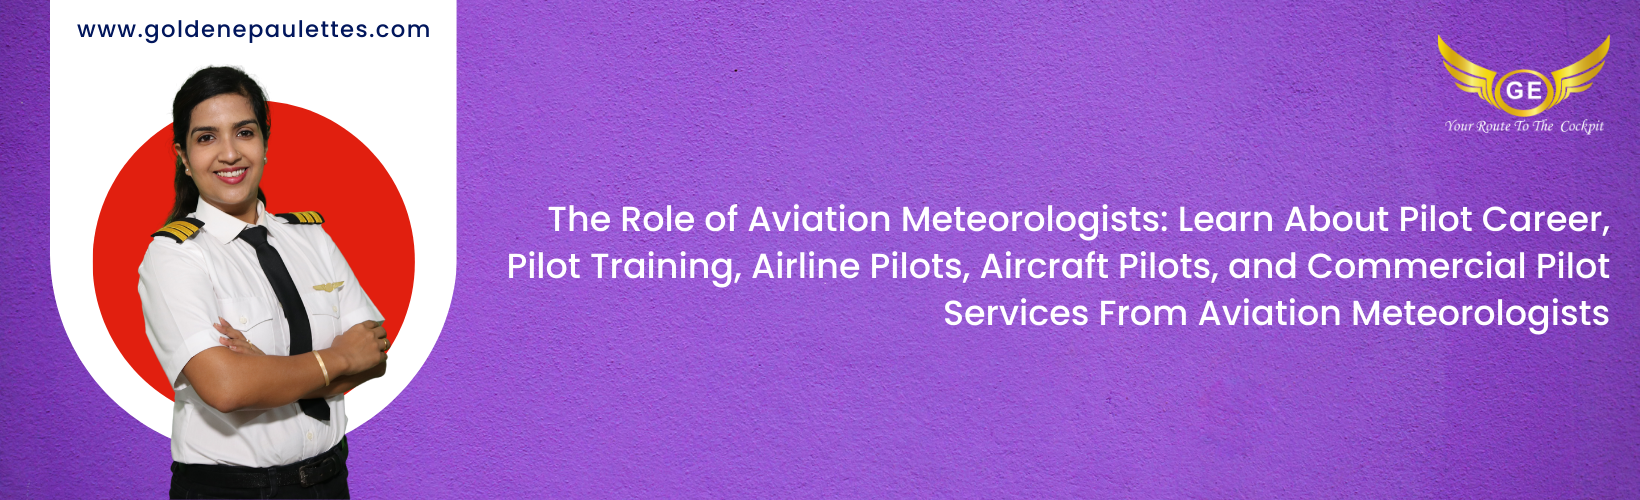 The Role of Aviation Meteorologists